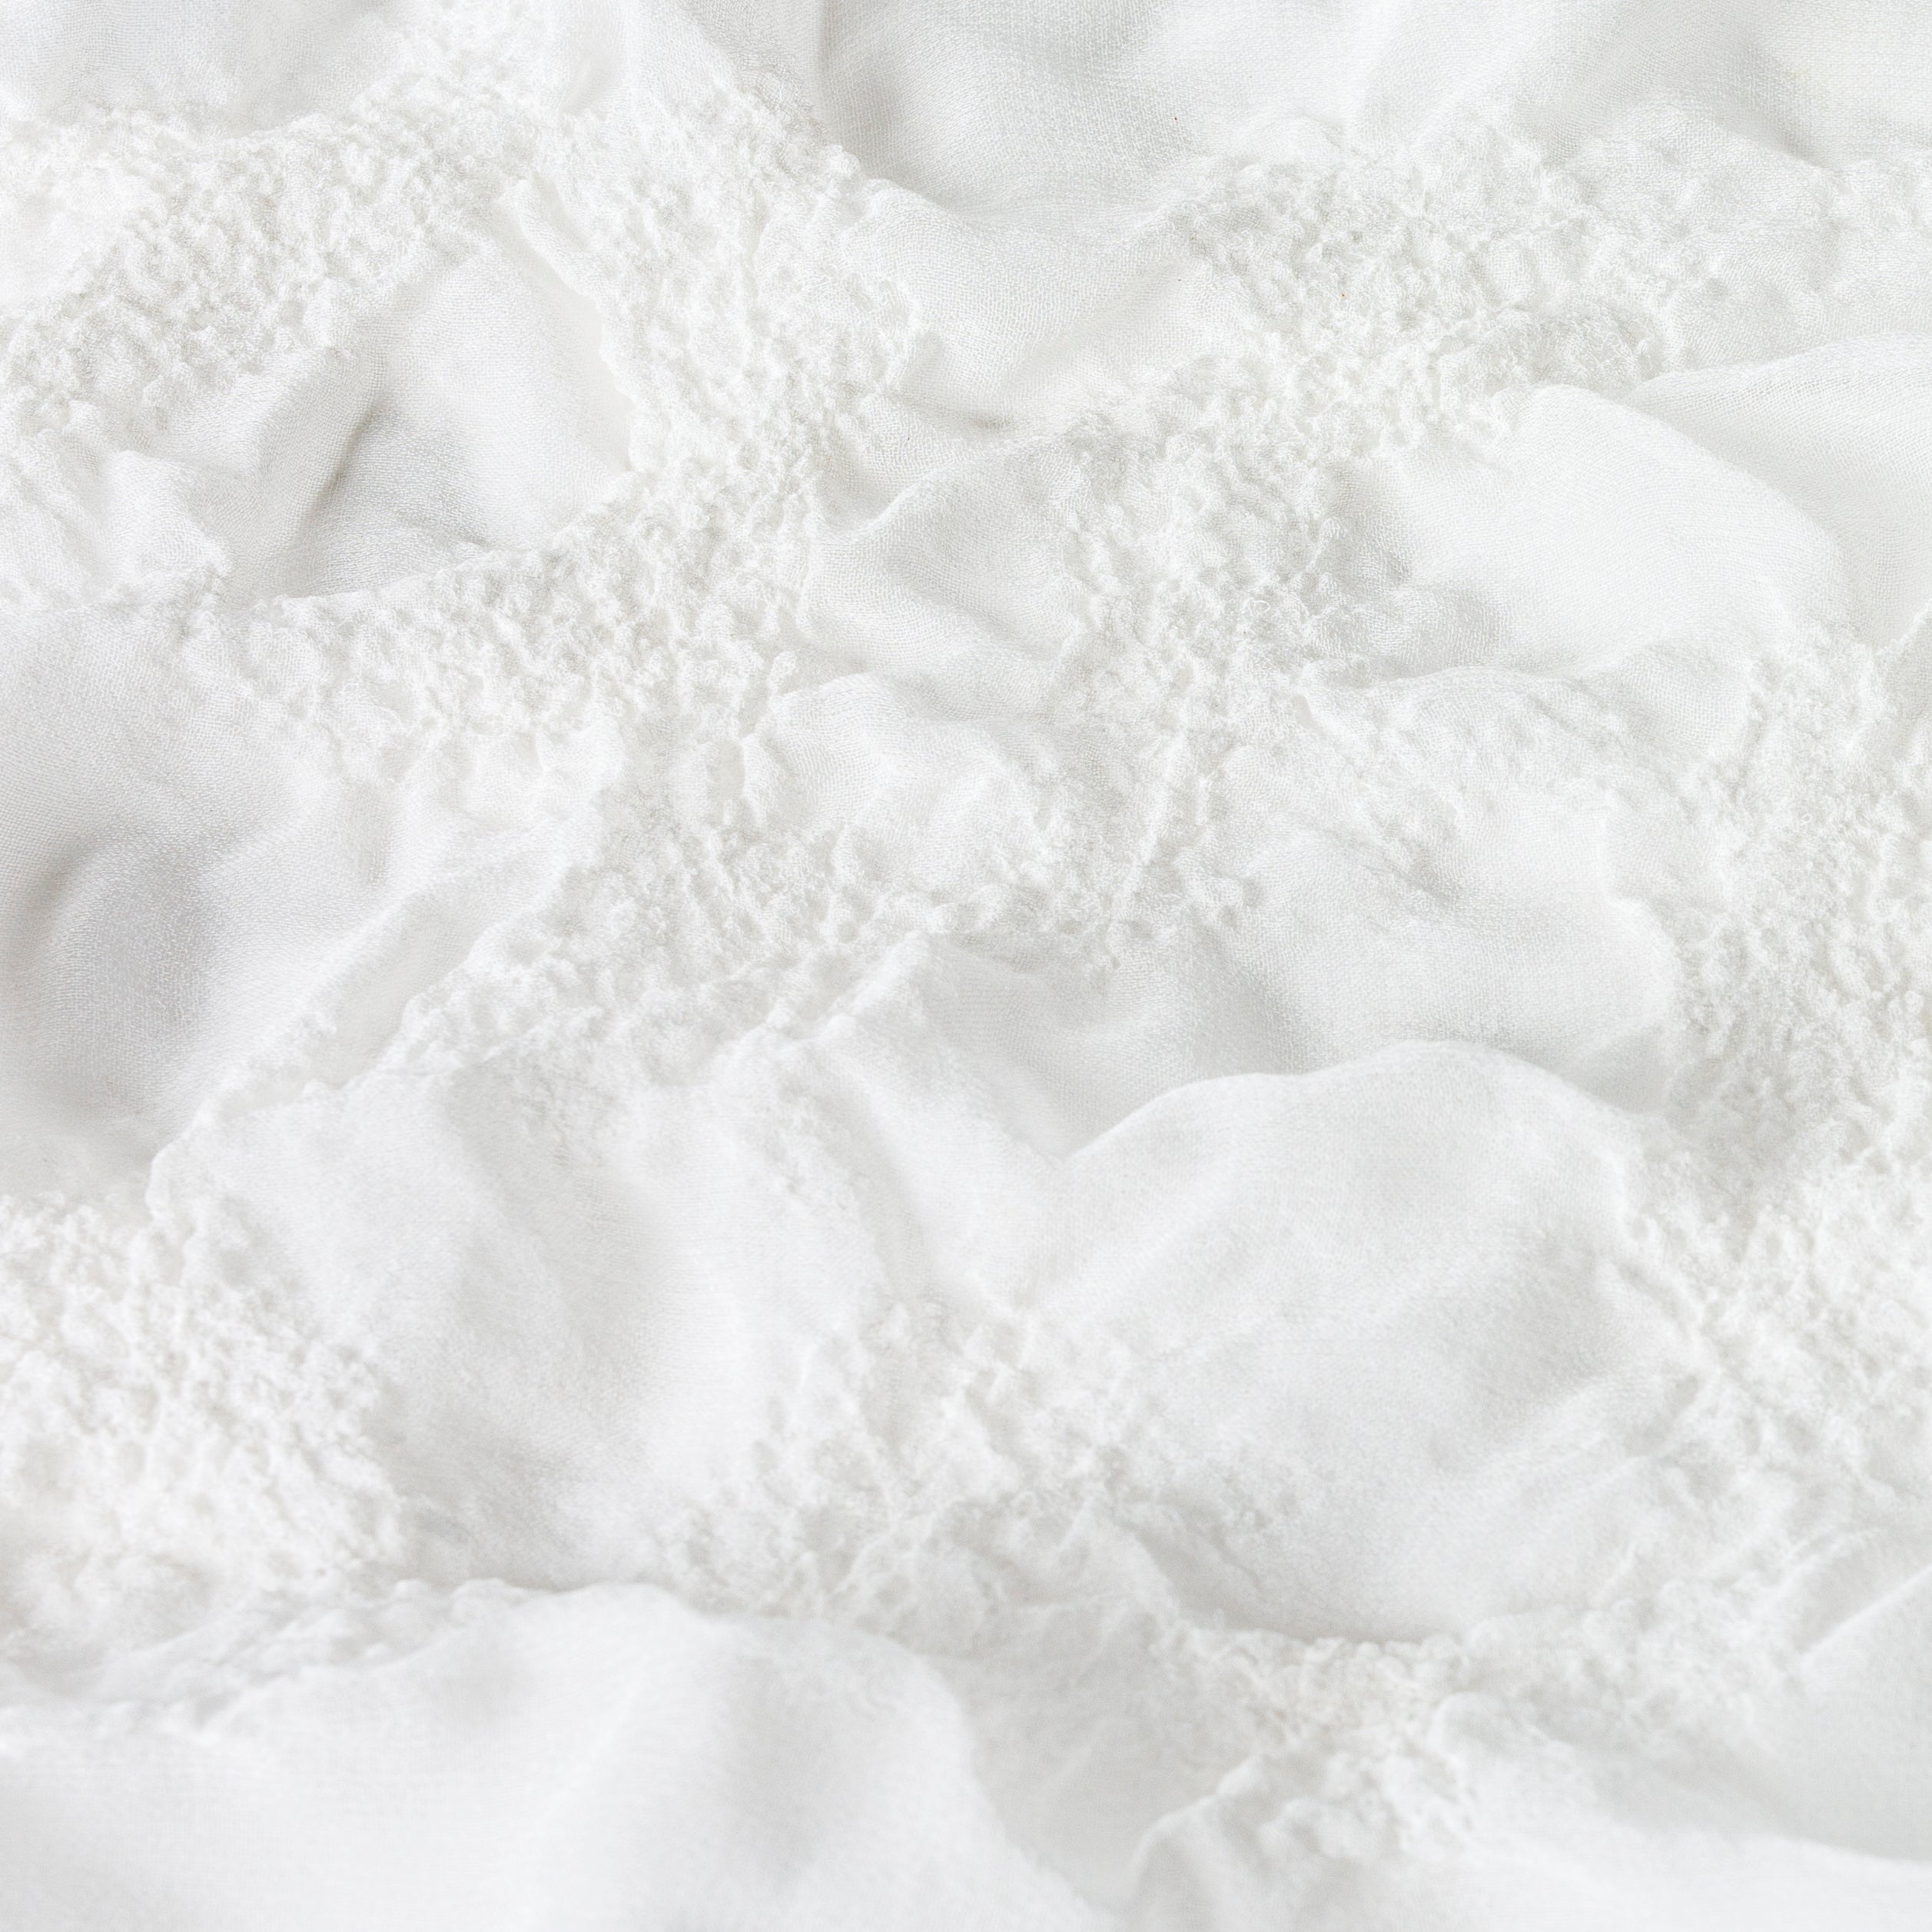 Textured White Silk Napkins for hire | Gold Coast Wedding & Event Hire